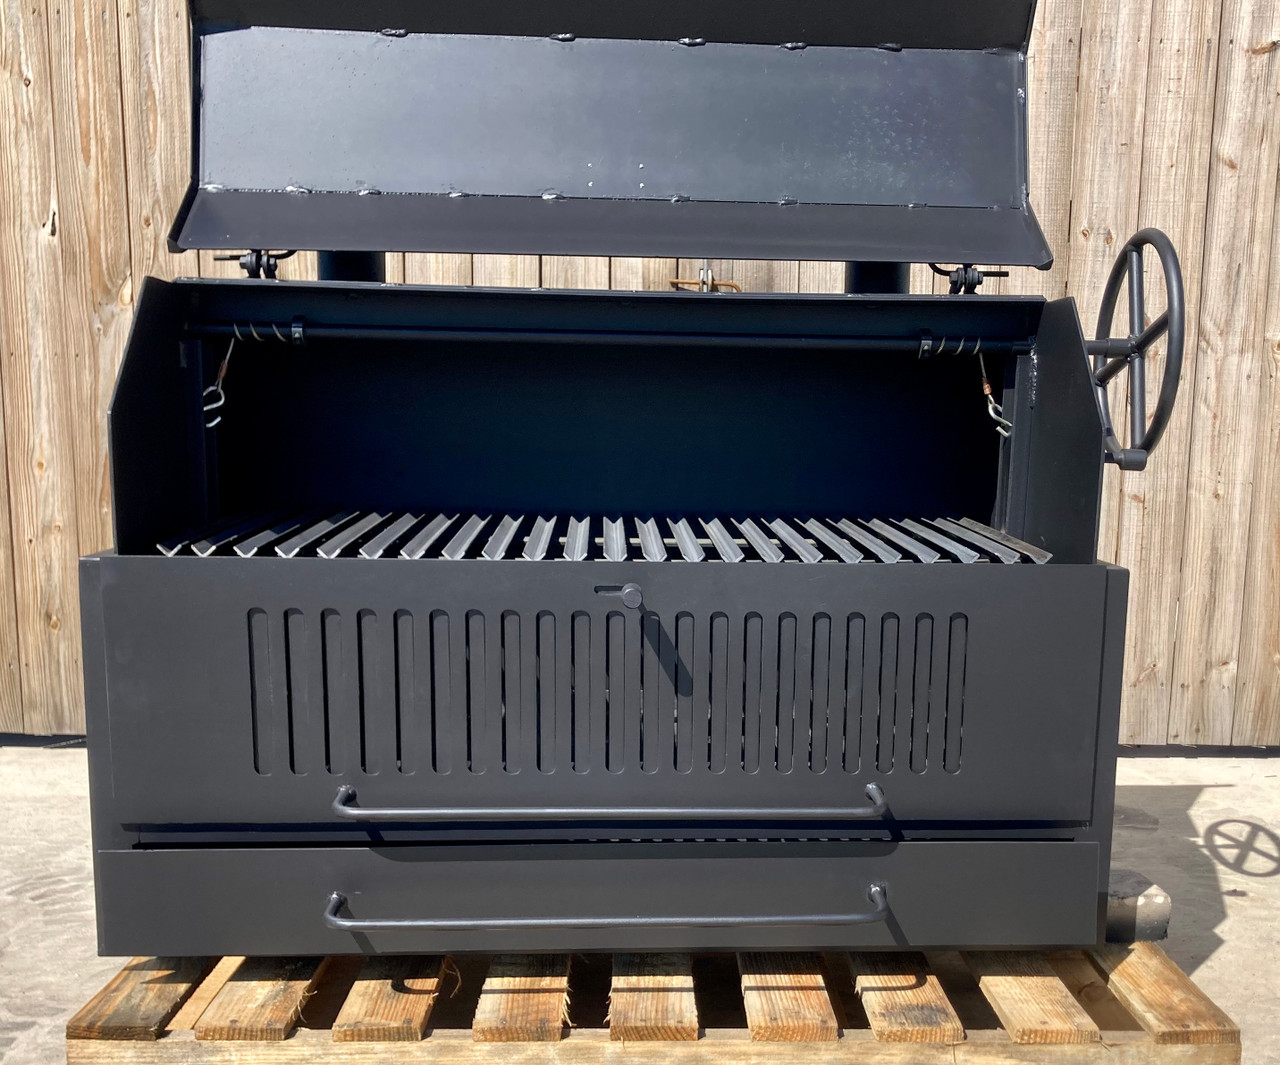 Barbecue Grill with Lid